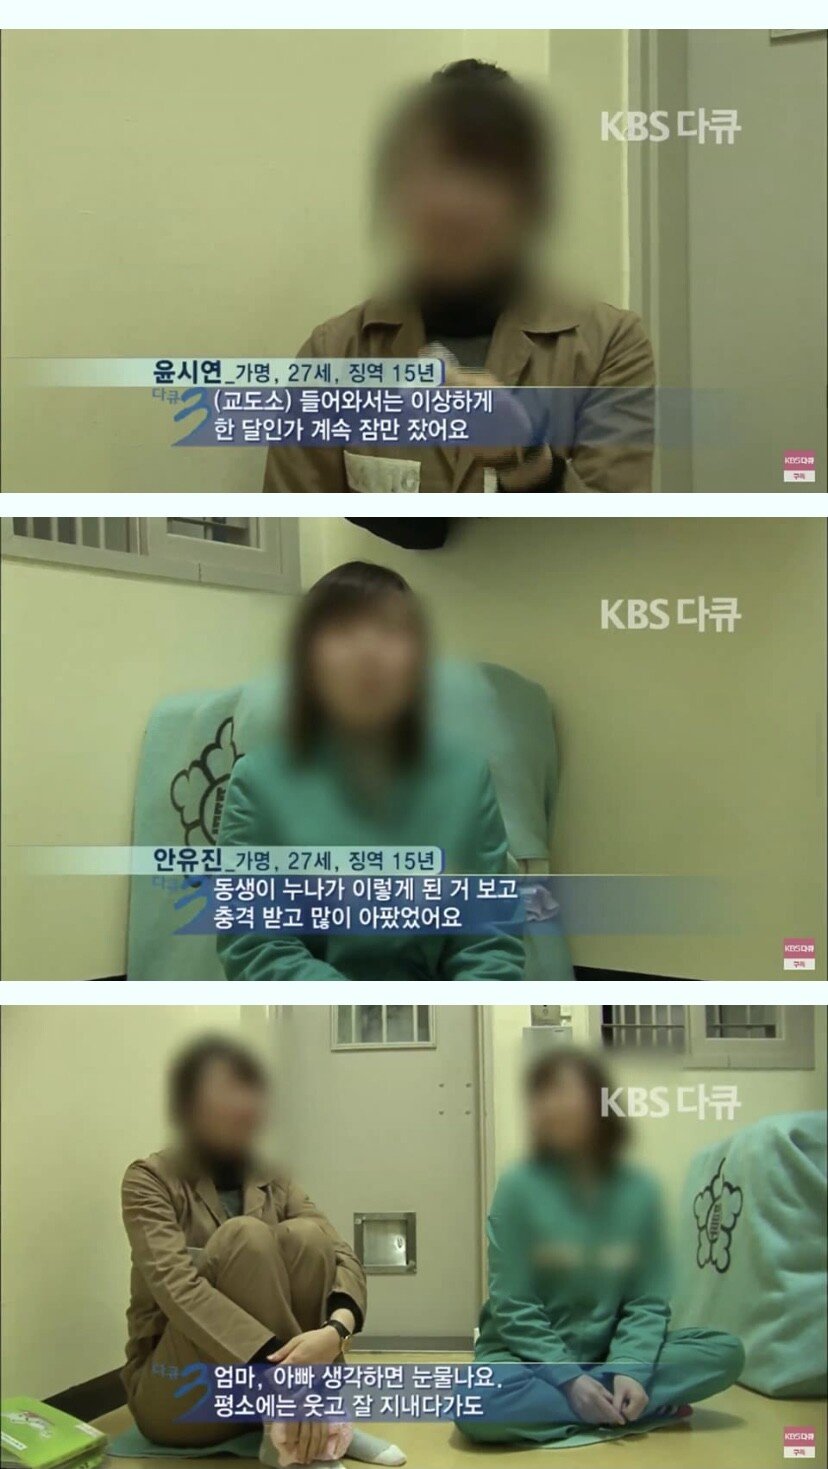 A female prisoner who was 17 years old and sentenced to 15 years.